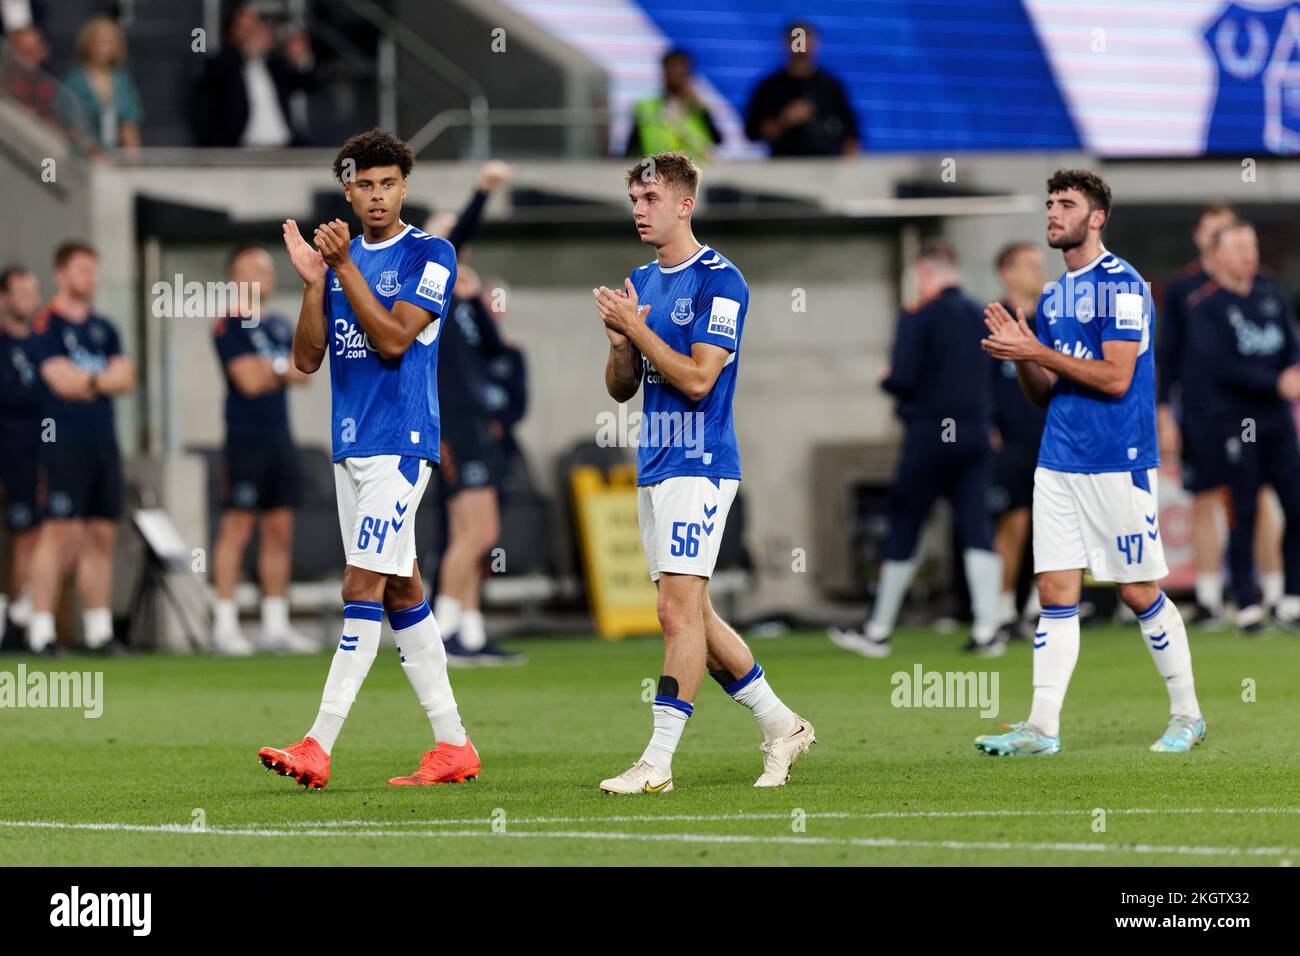 Sydney, Australia. 23rd Nov, 2022. SYDNEY, AUSTRALIA - NOVEMBER 23: Everton FC players thank their fans after the match between Everton and Wanderers at CommBank Stadium on November 23, 2022 in Sydney, Australia Credit: IOIO IMAGES/Alamy Live News Stock Photo